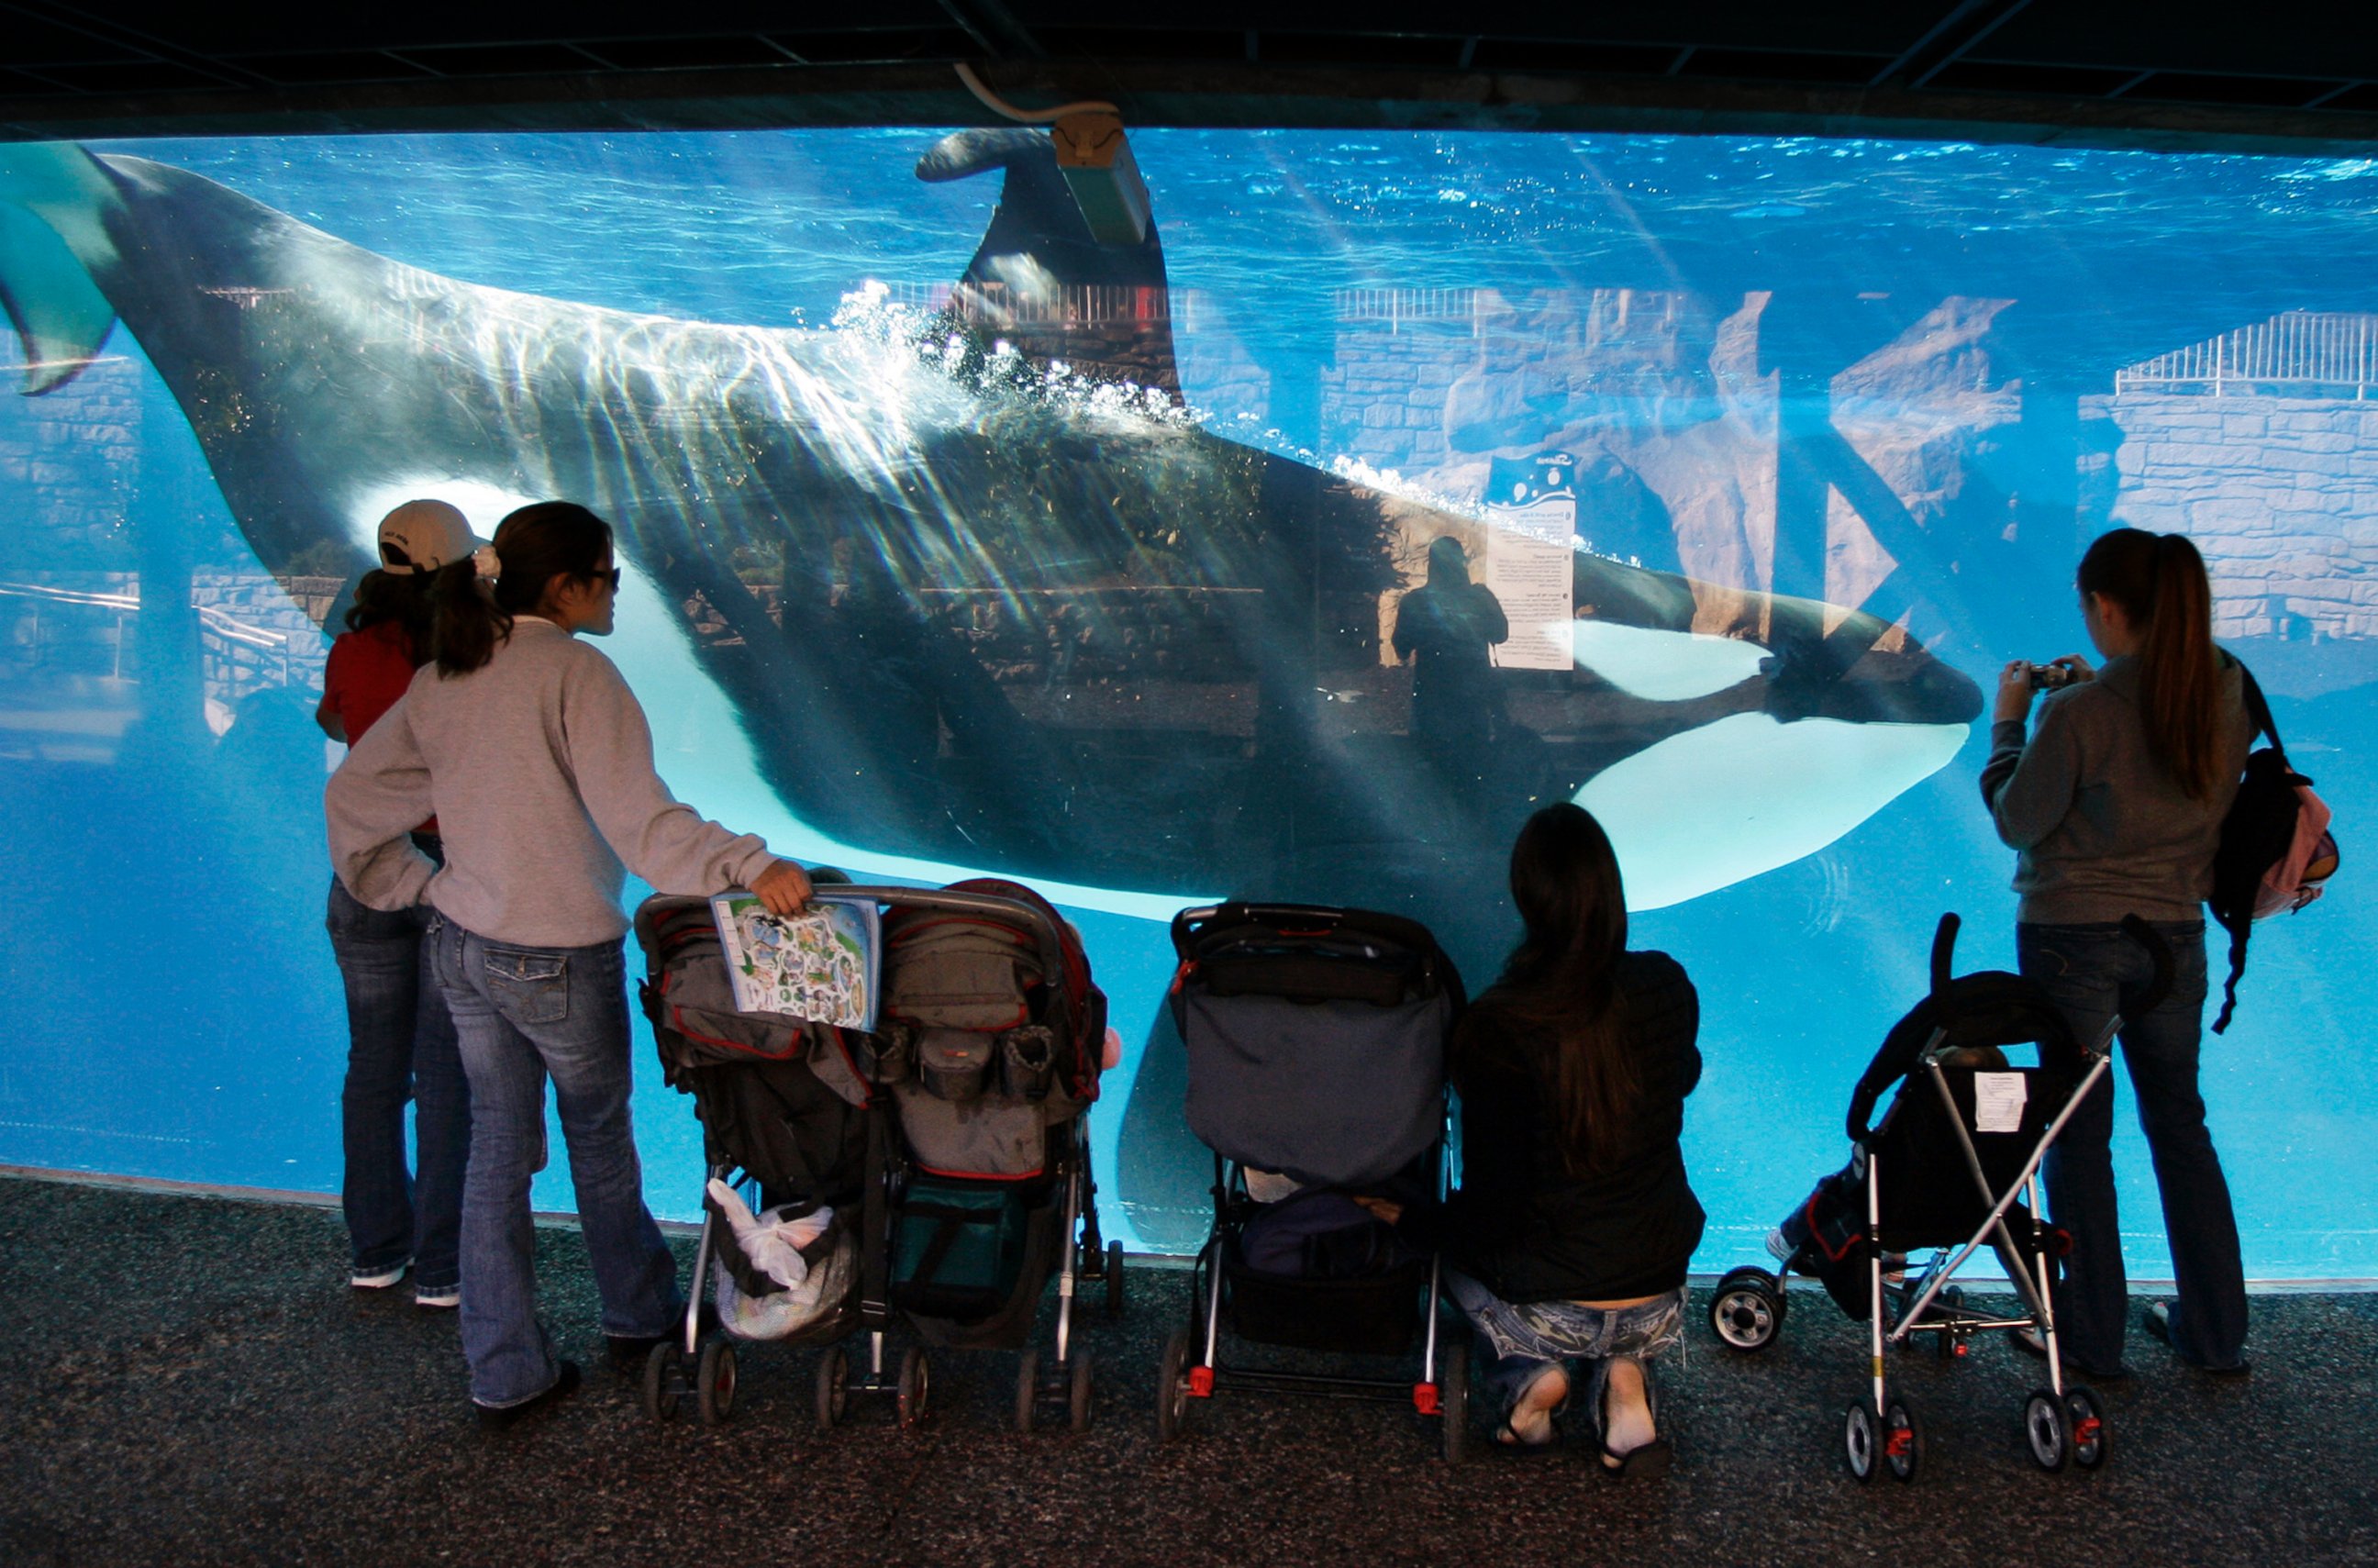 PHOTO: People watch through glass as a killer whale swims by in a display tank at SeaWorld in San Diego, Nov. 30, 2006.